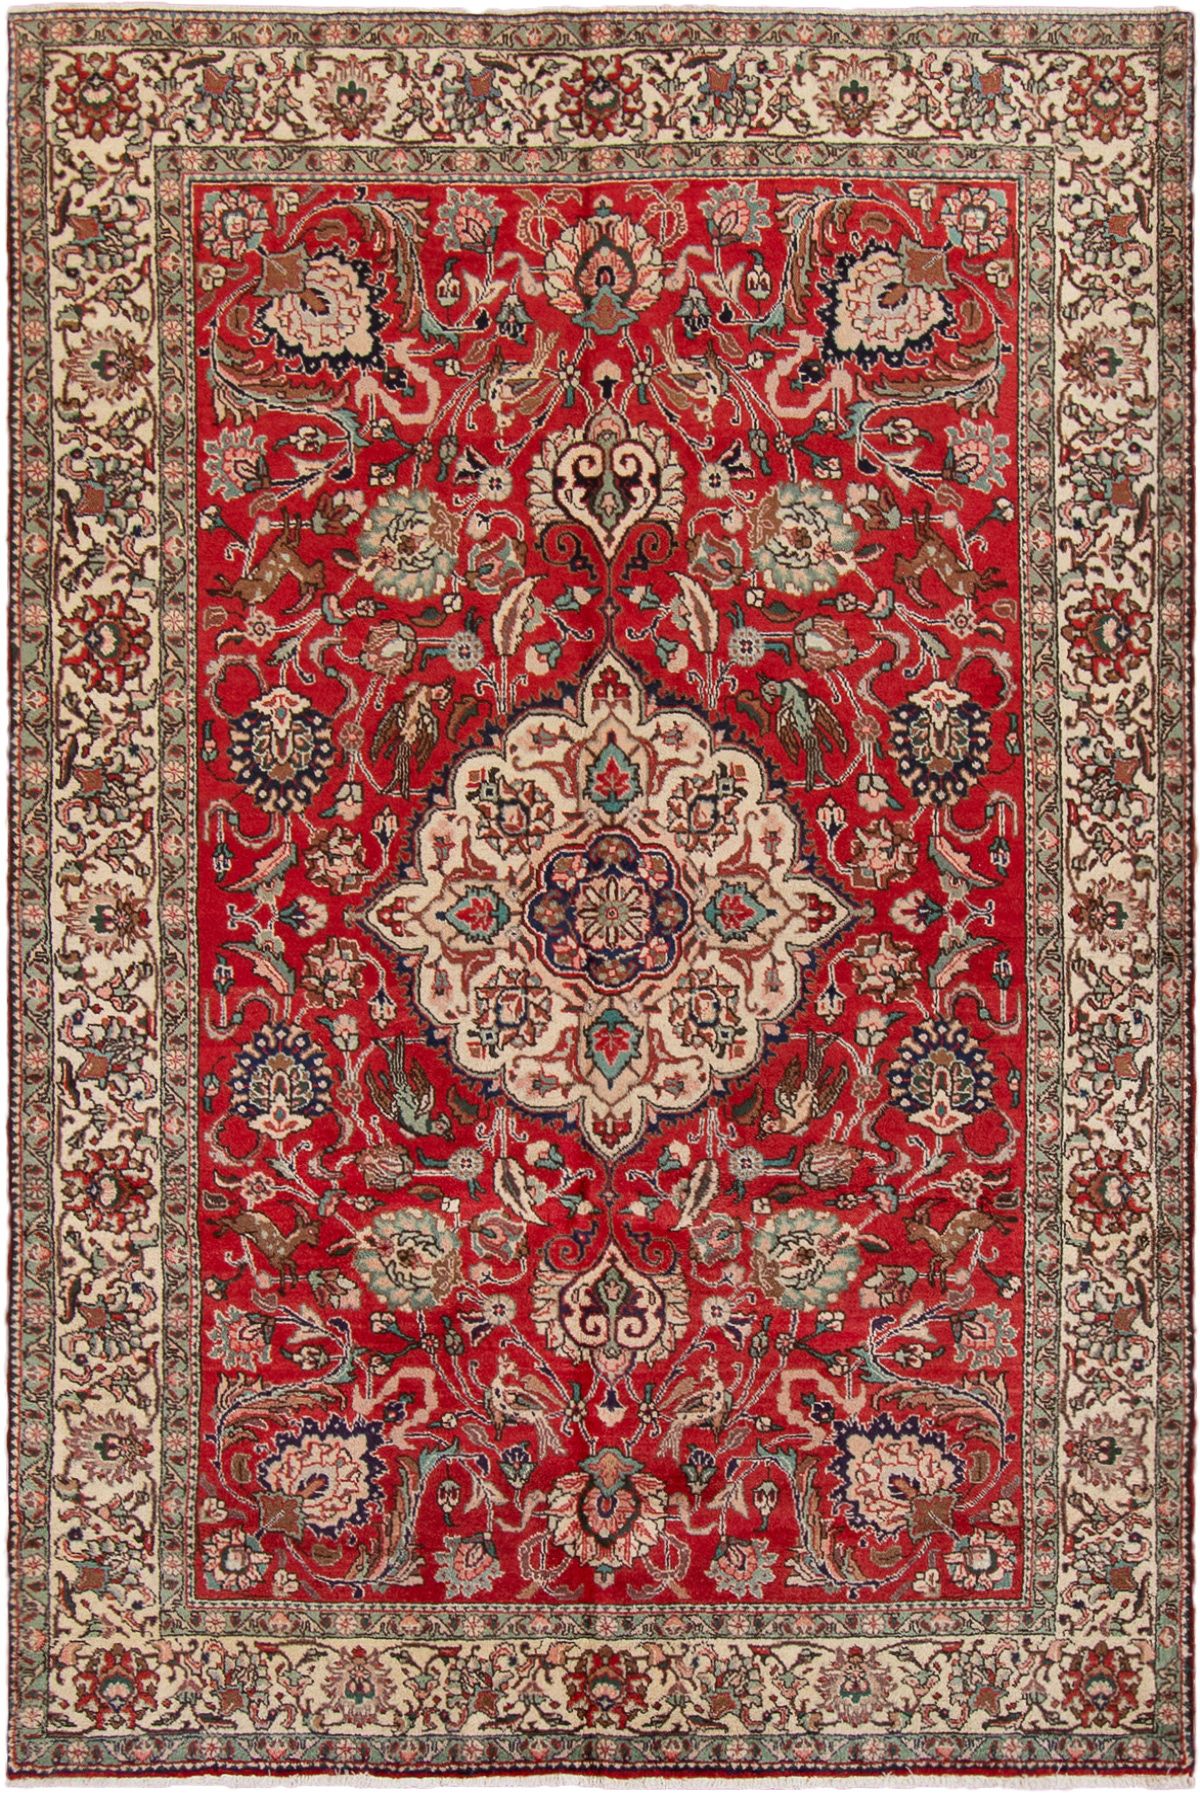 Hand-knotted Tabriz  Wool Rug 6'6" x 9'10" Size: 6'6" x 9'10"  